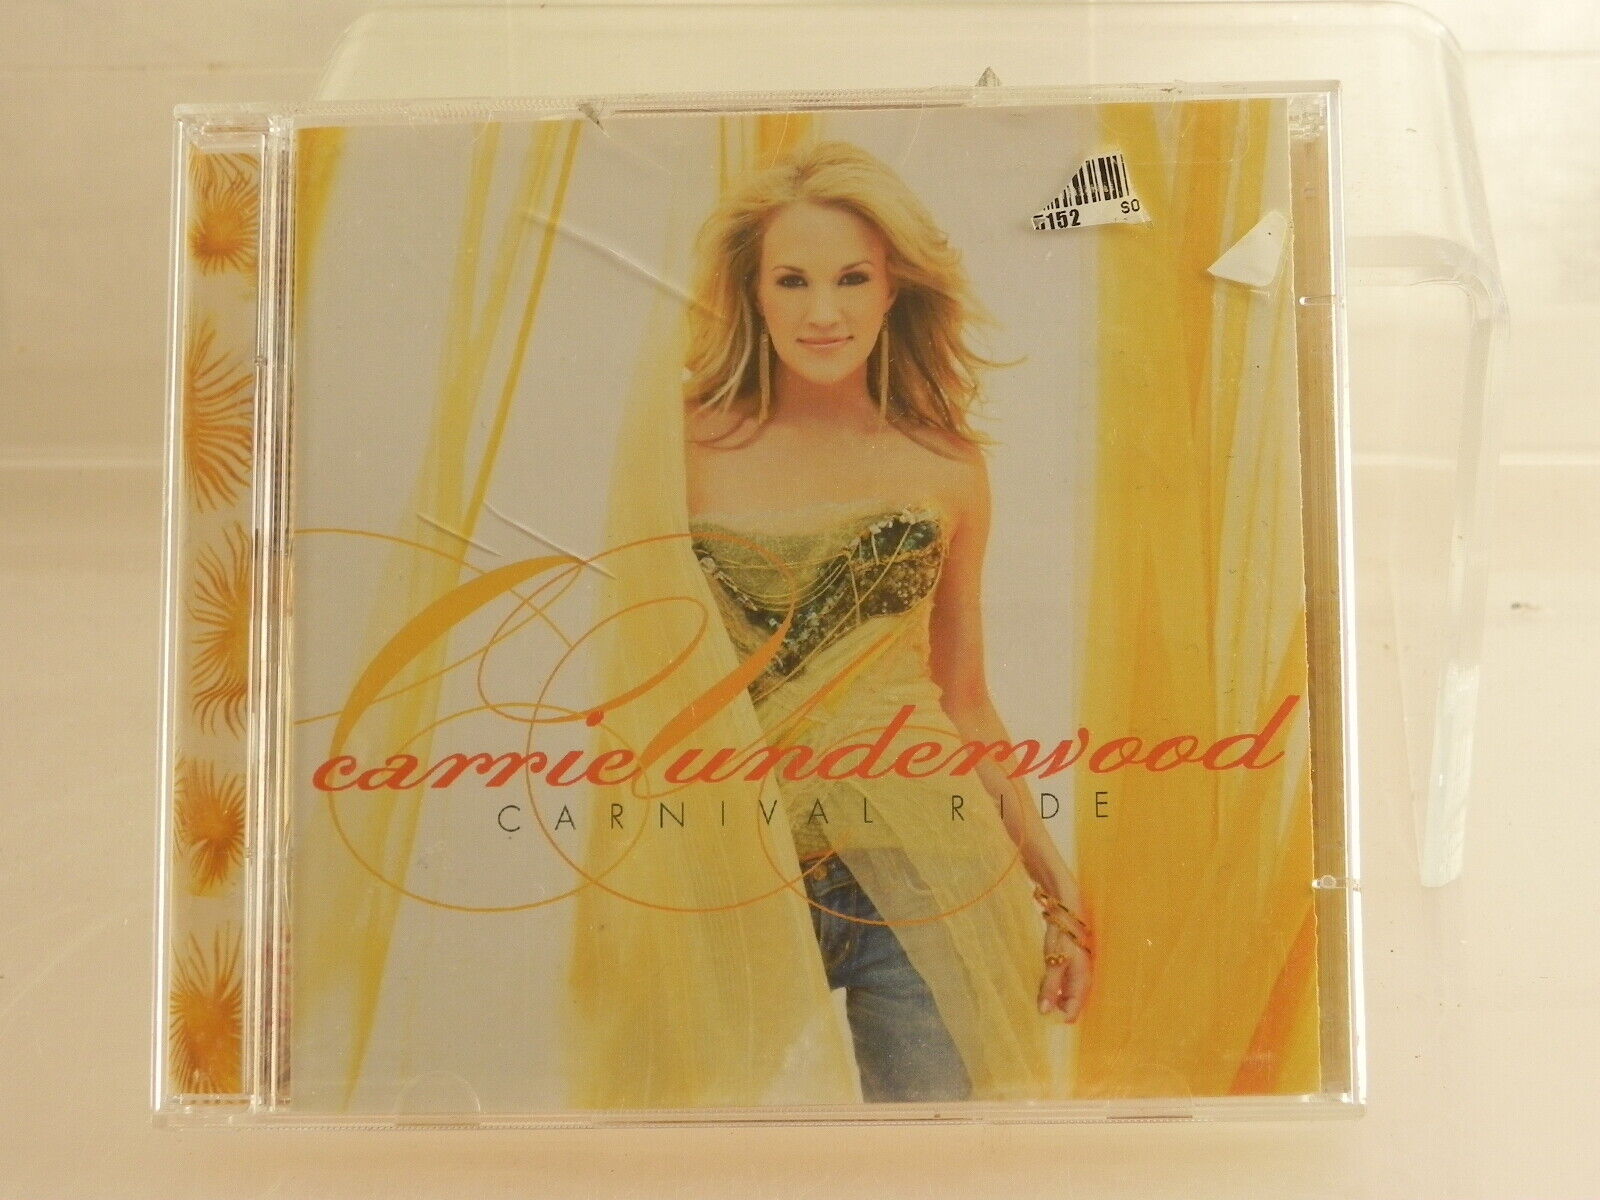 Carnival Ride by Carrie Underwood (CD/DVD, Oct-2007, Arista Nashville)  